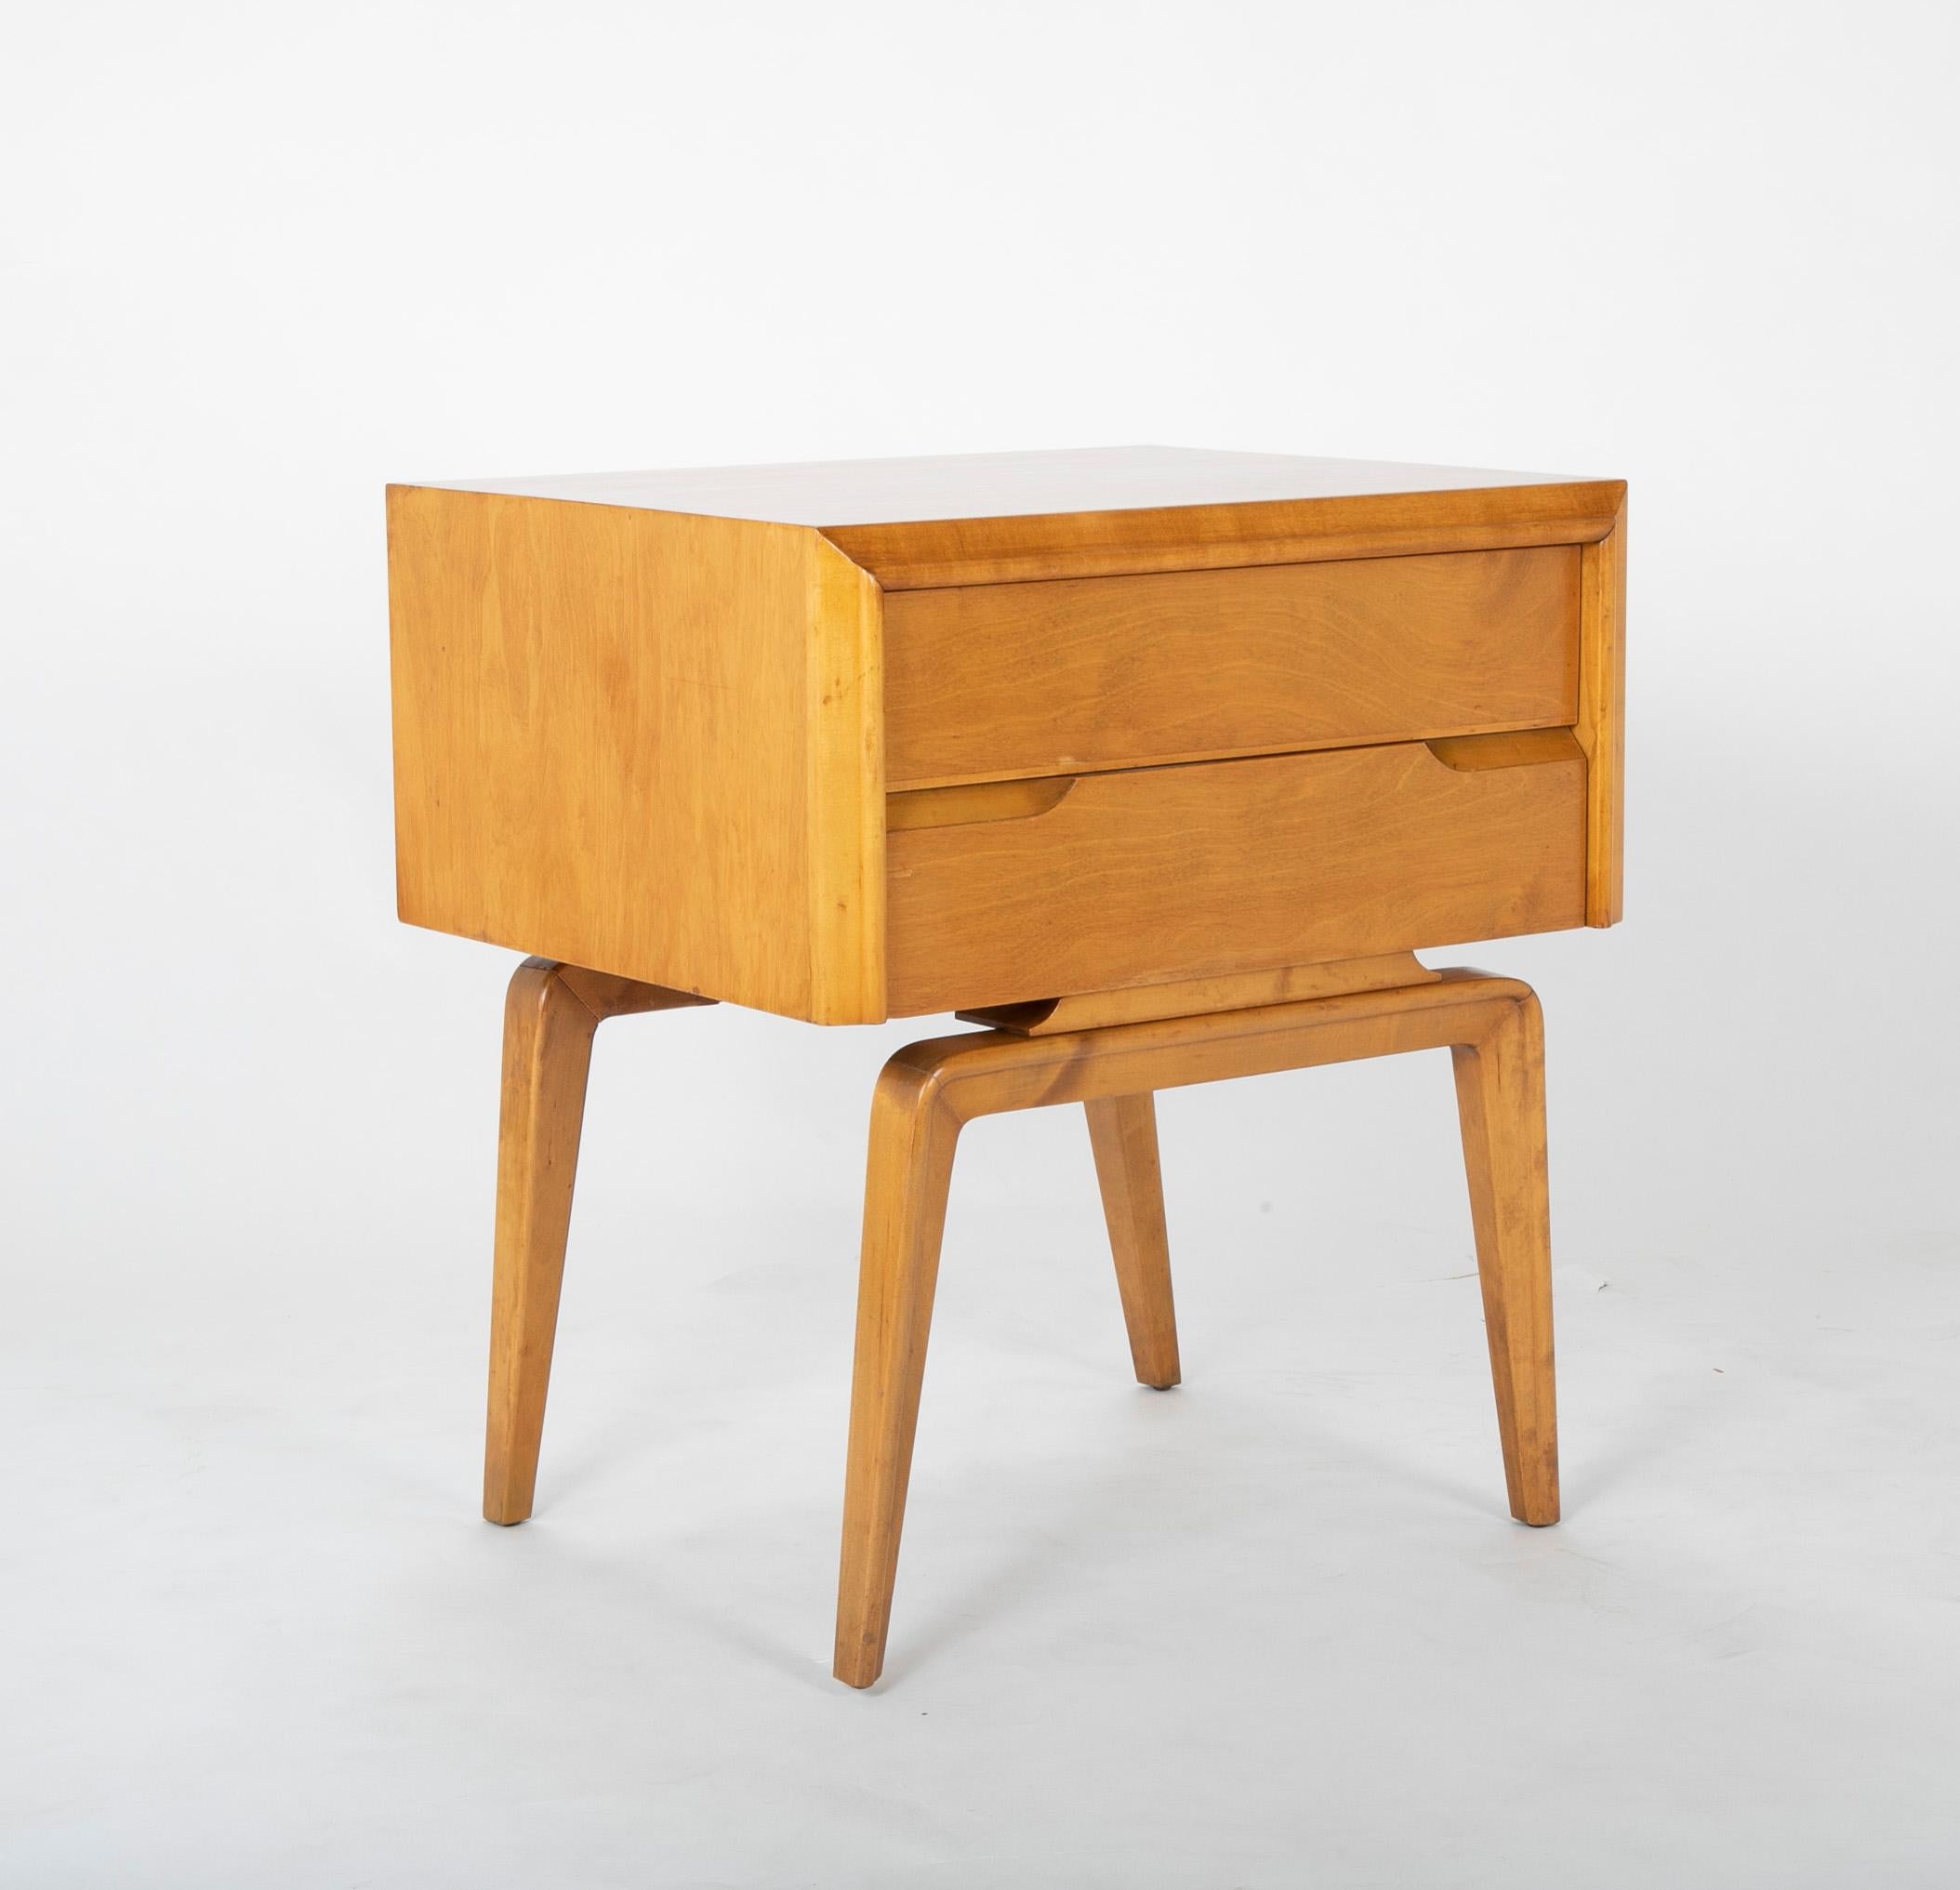 Swedish Pair of Maple Side Tables Designed by Edmond Spence